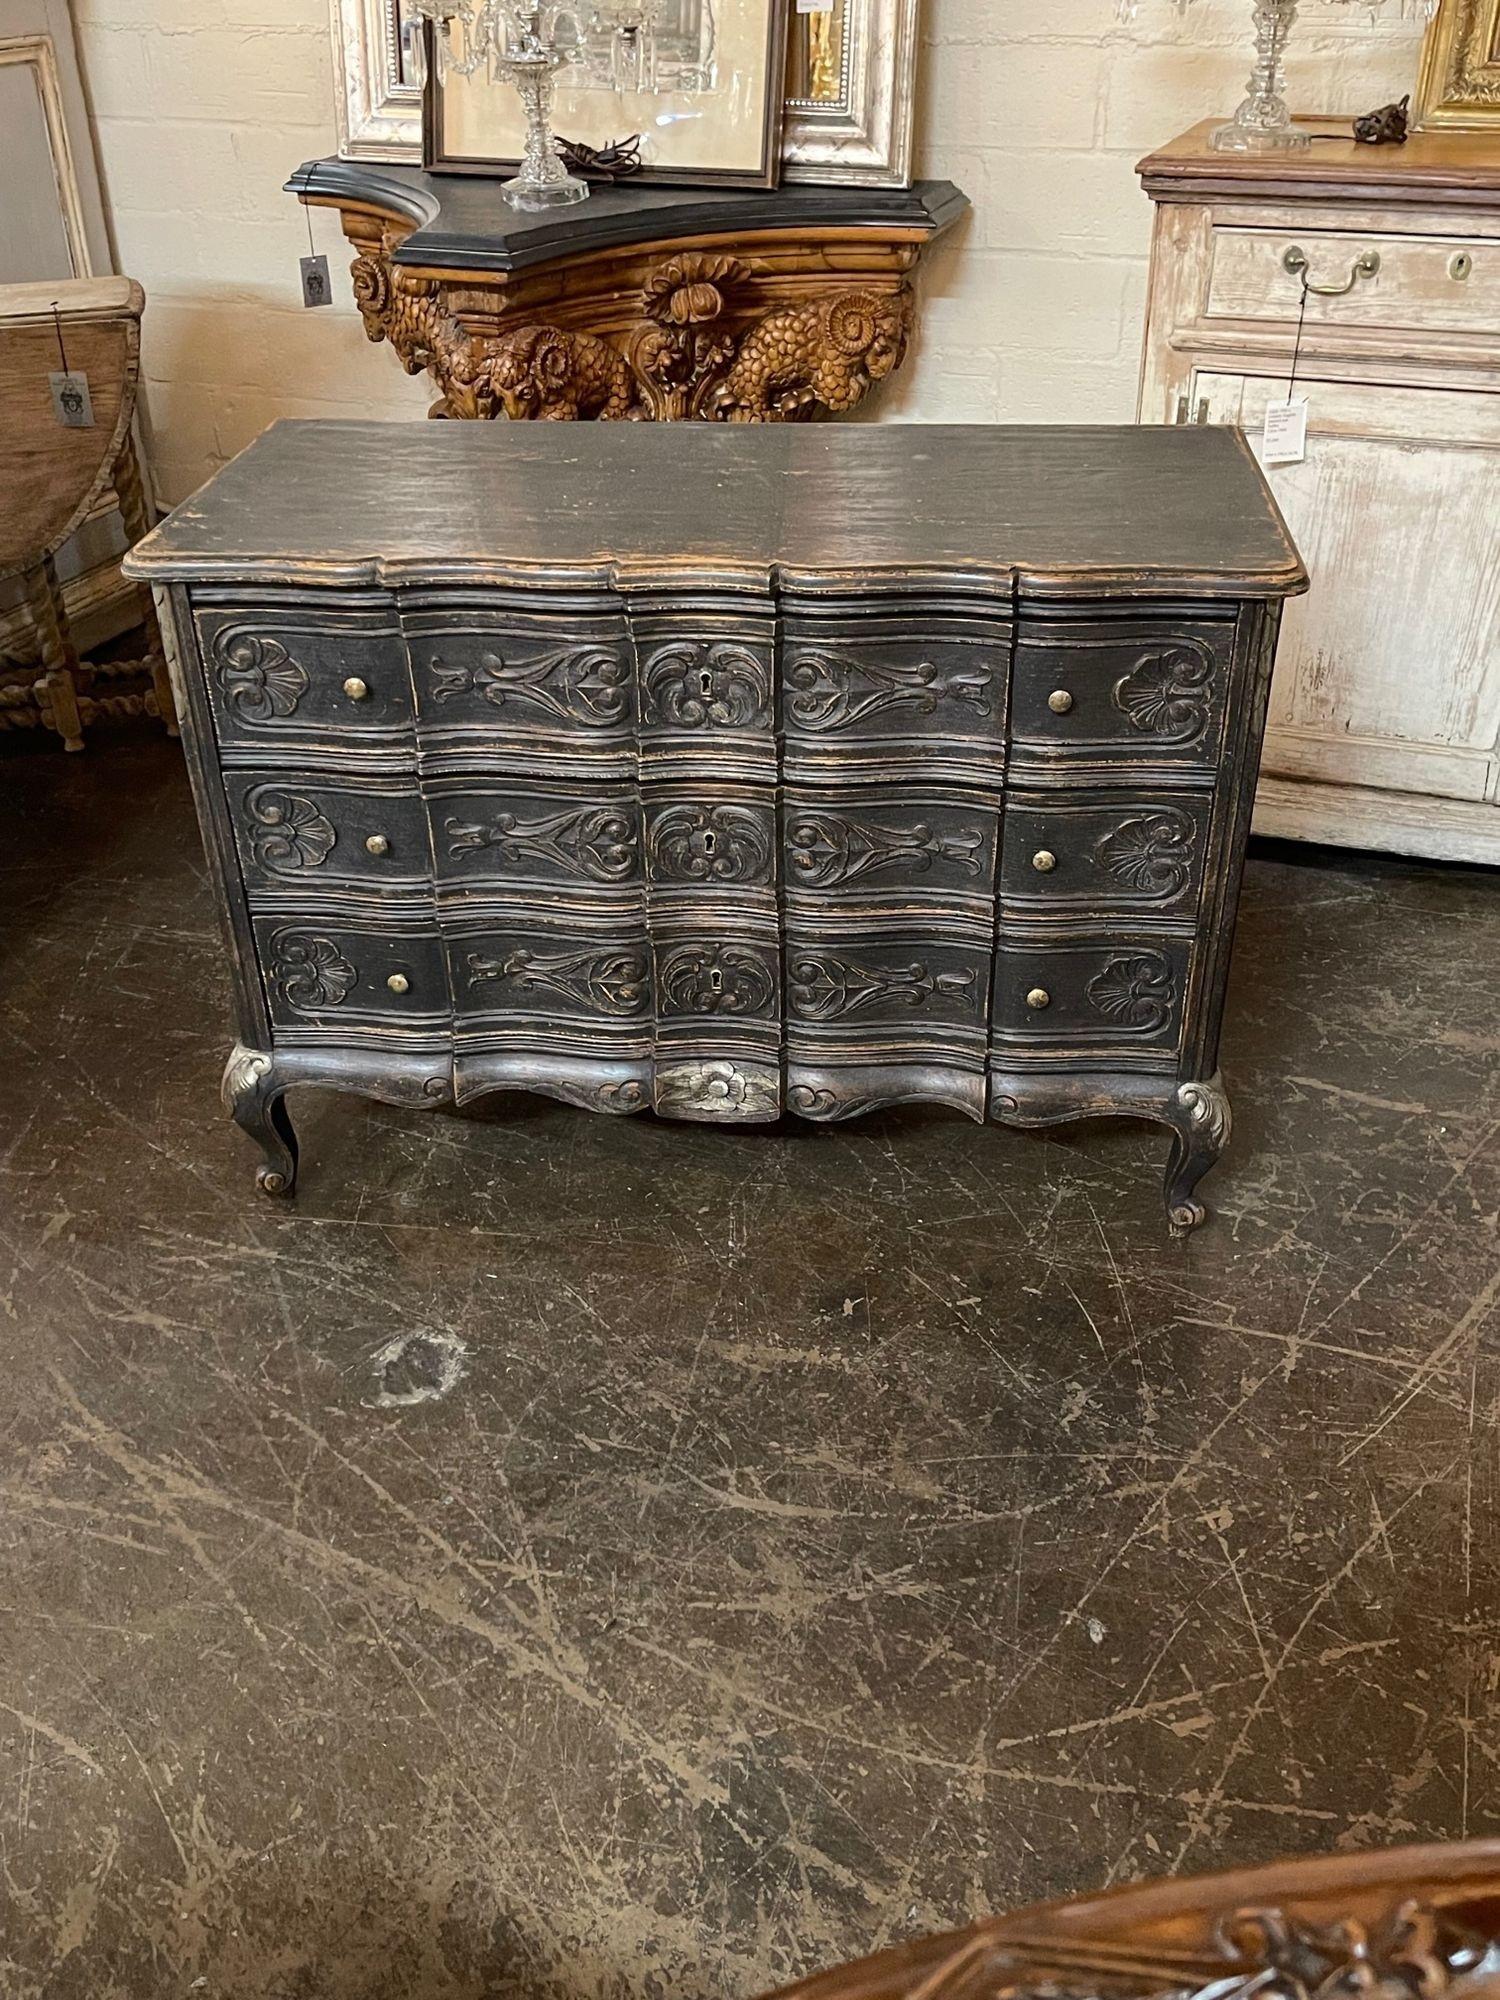 Handsome 19th century French carved and painted bedside chest. The piece has a pretty black colored patina and a curved shape on the front with beautiful carved. Very nice!!